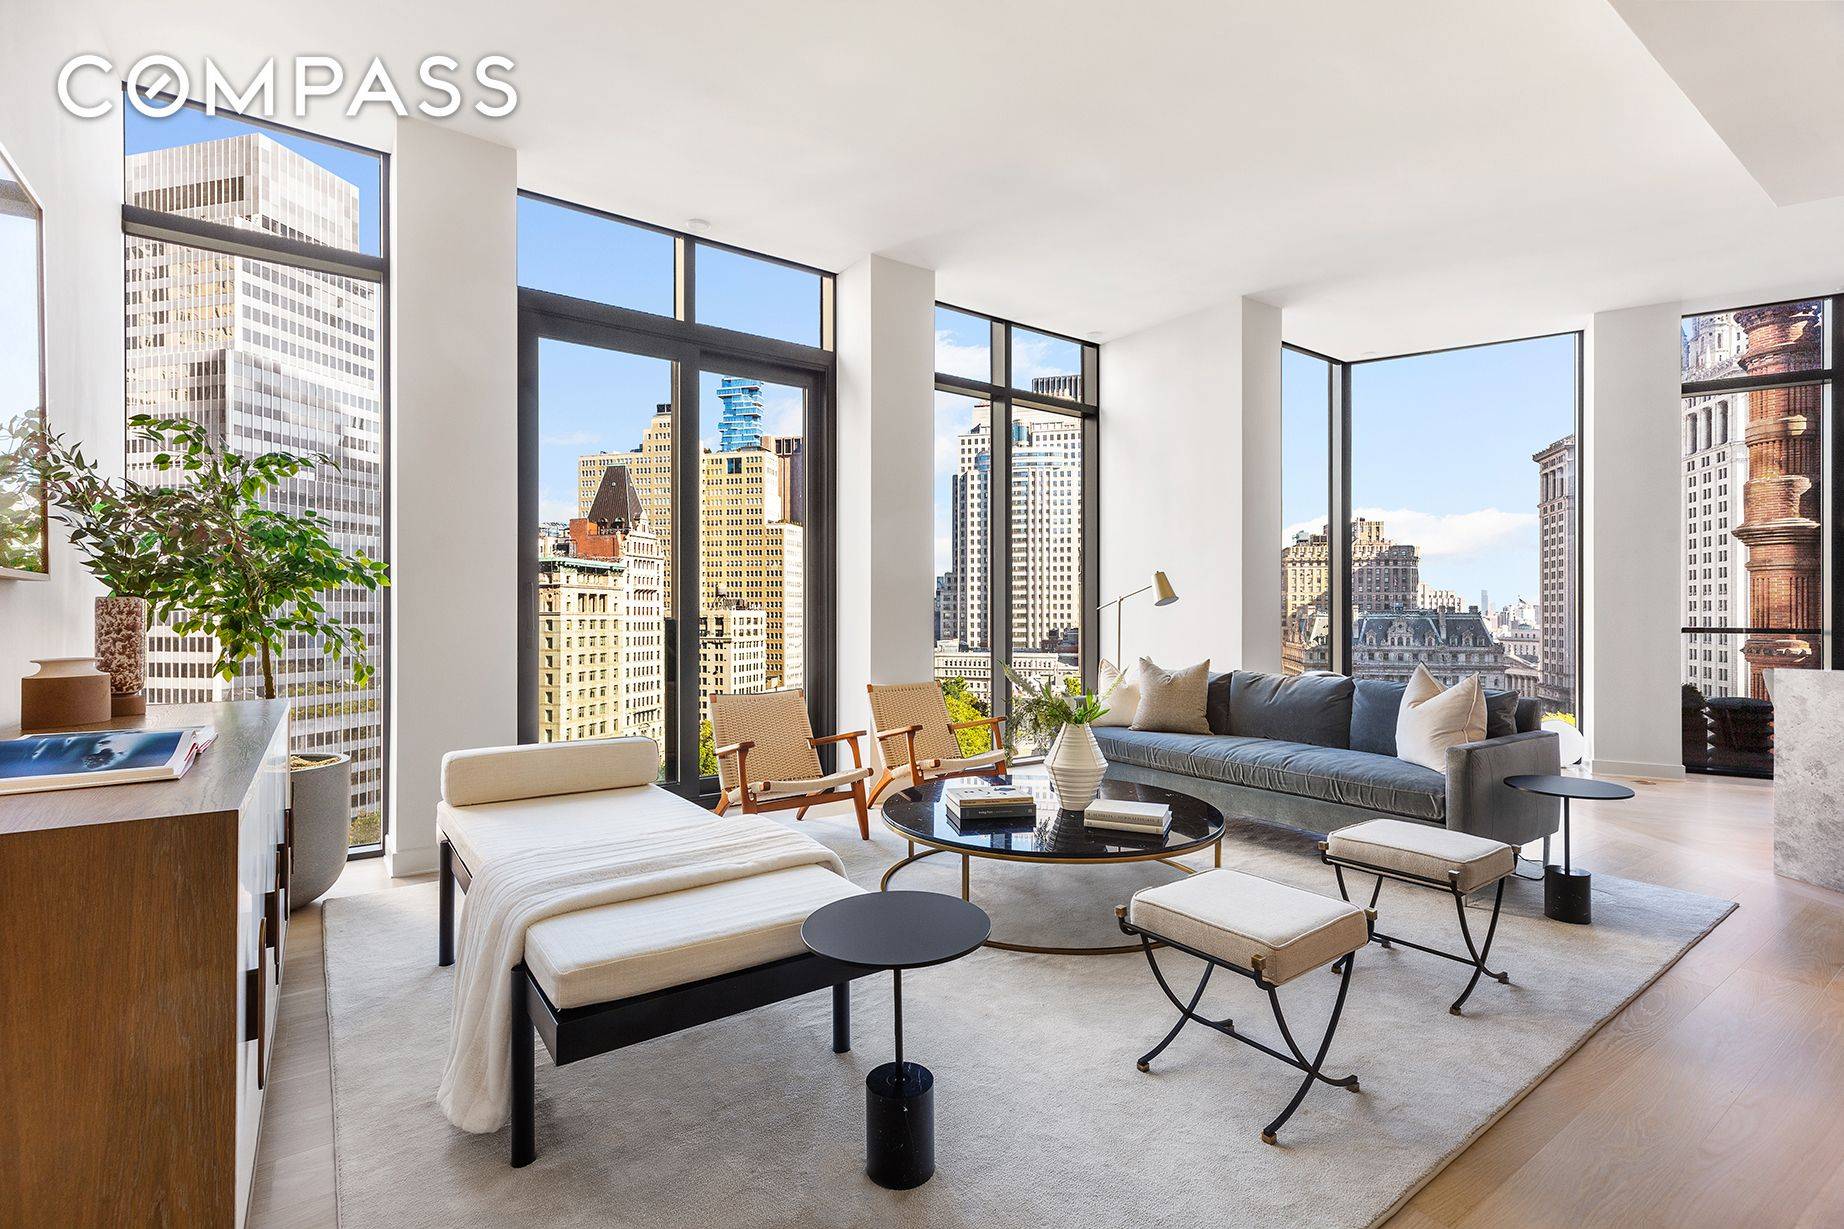 Closings Have Begun ! The first residential property in New York City by Pritzker Prize winning architect Richard Rogers, Rogers Stirk Harbour Partners.